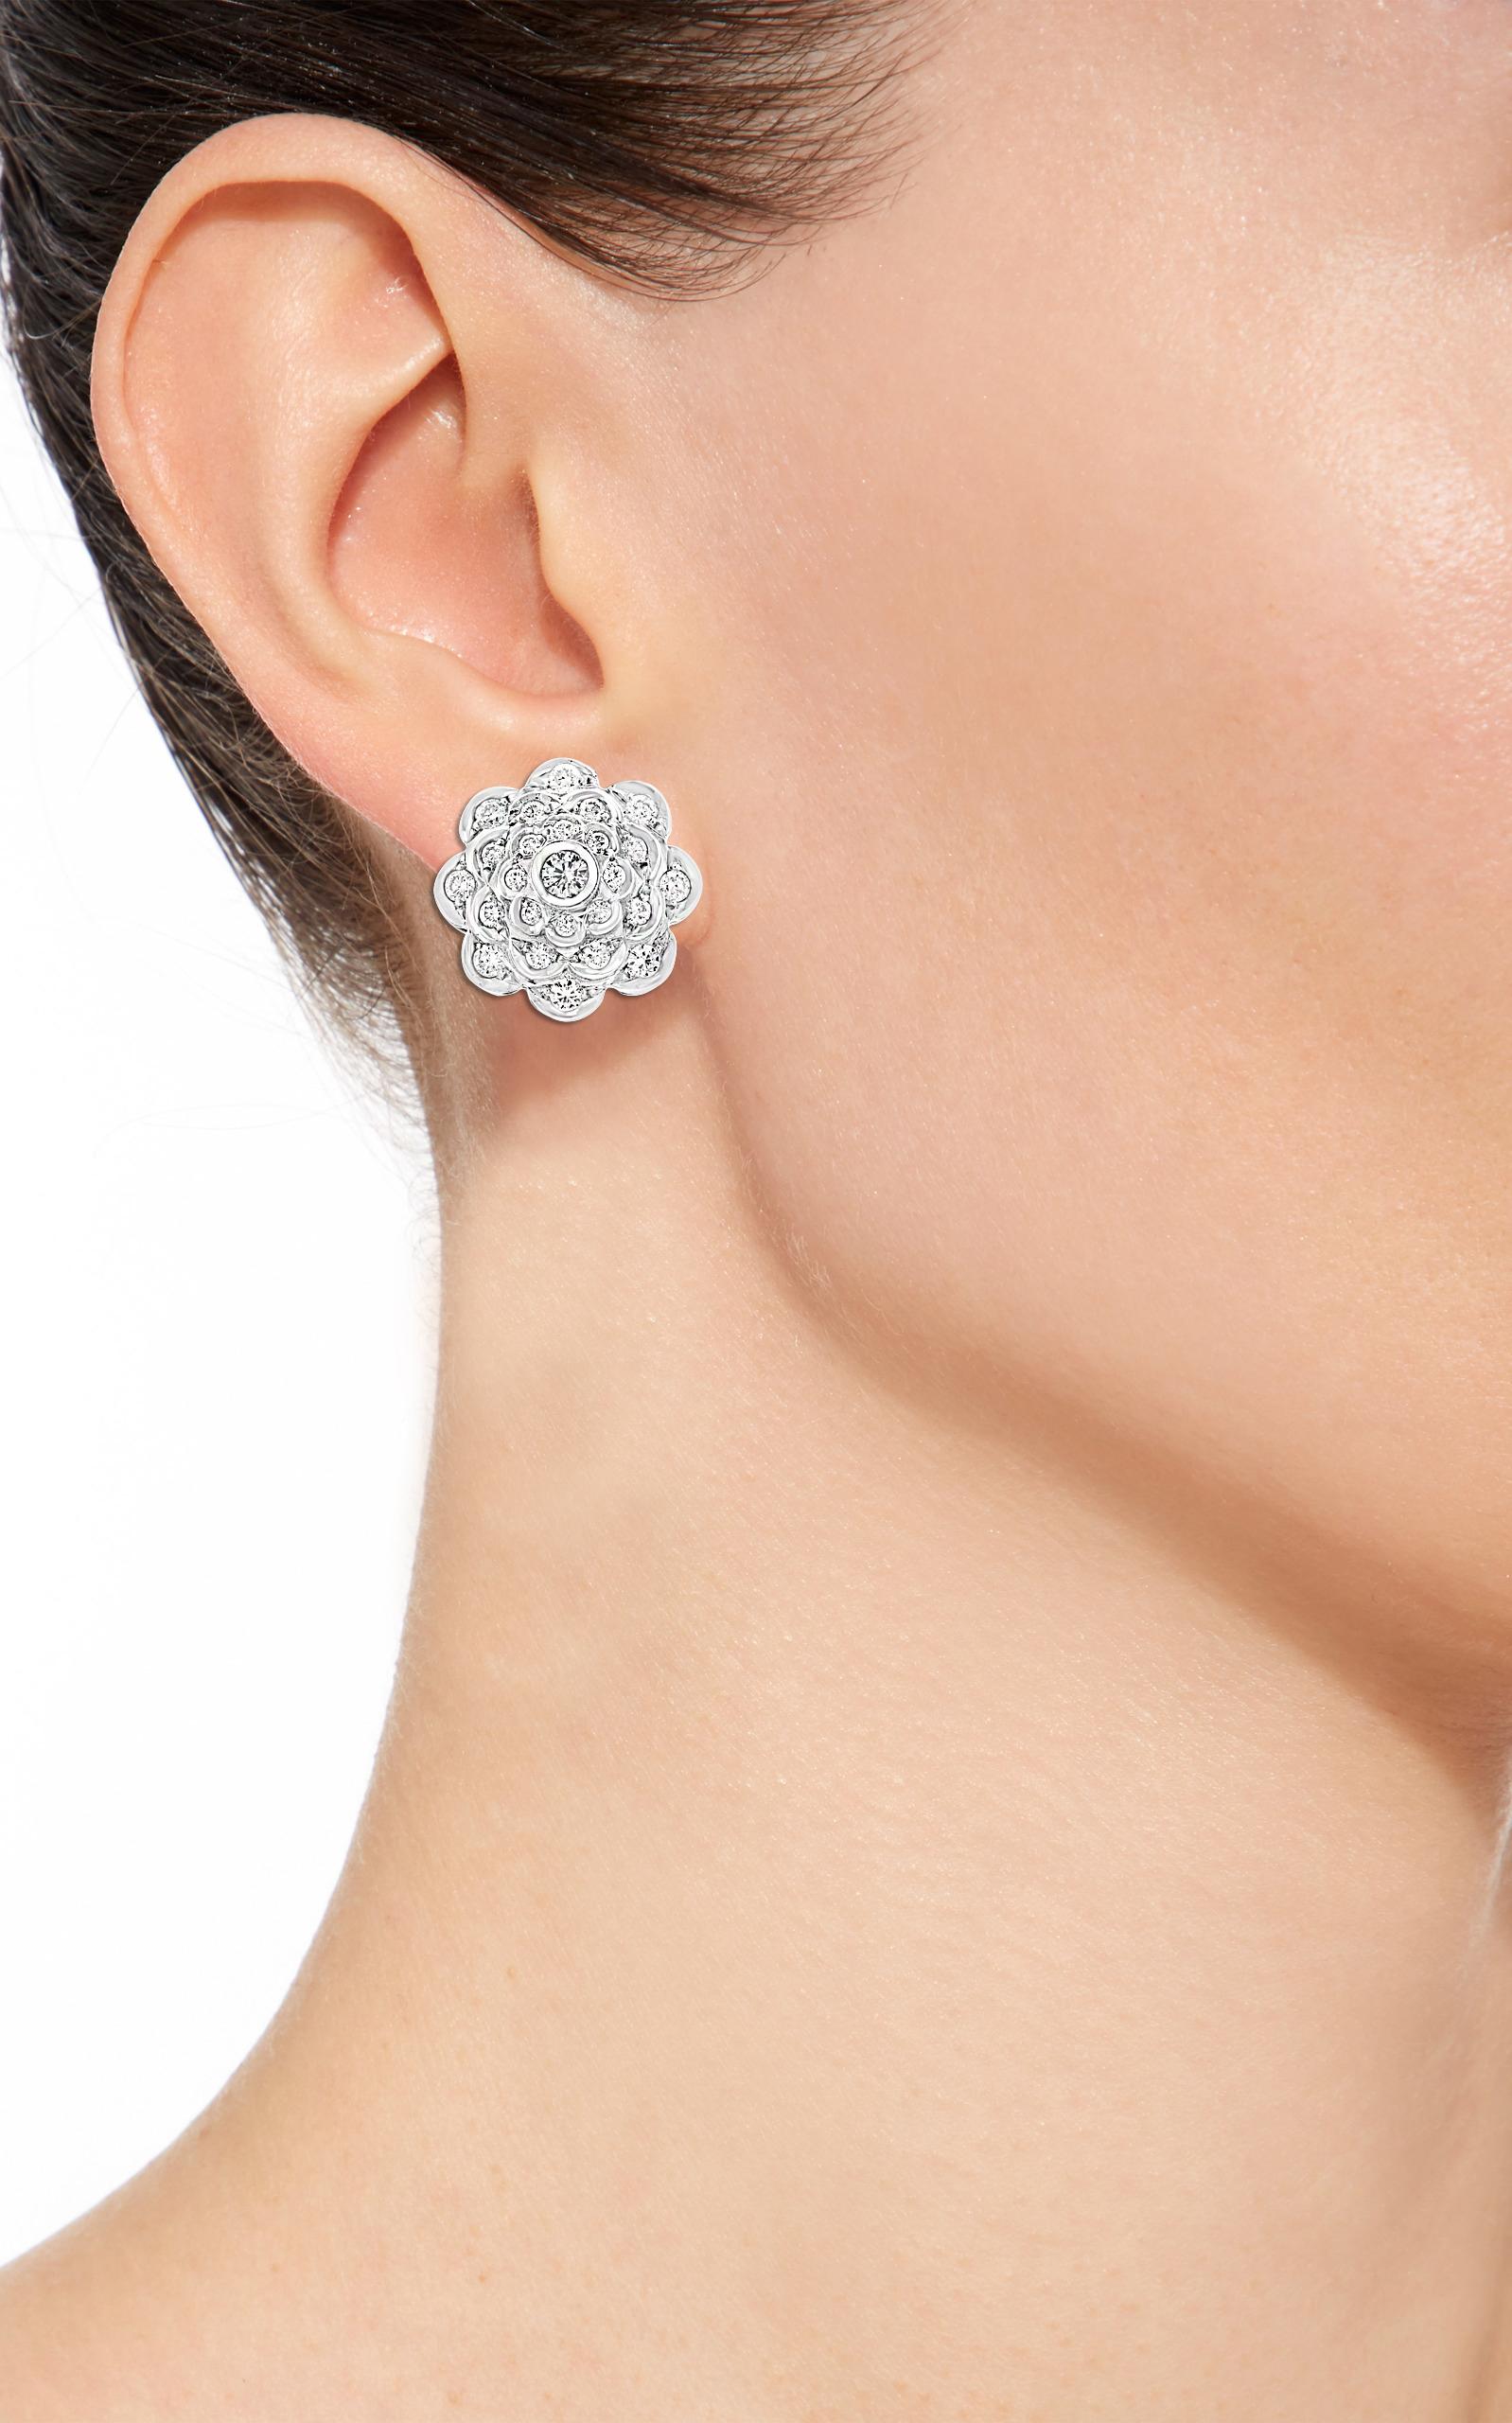 2.8 Carat Diamond VS Quality Flower/Cluster Earring 18 Karat White Gold In Excellent Condition For Sale In New York, NY